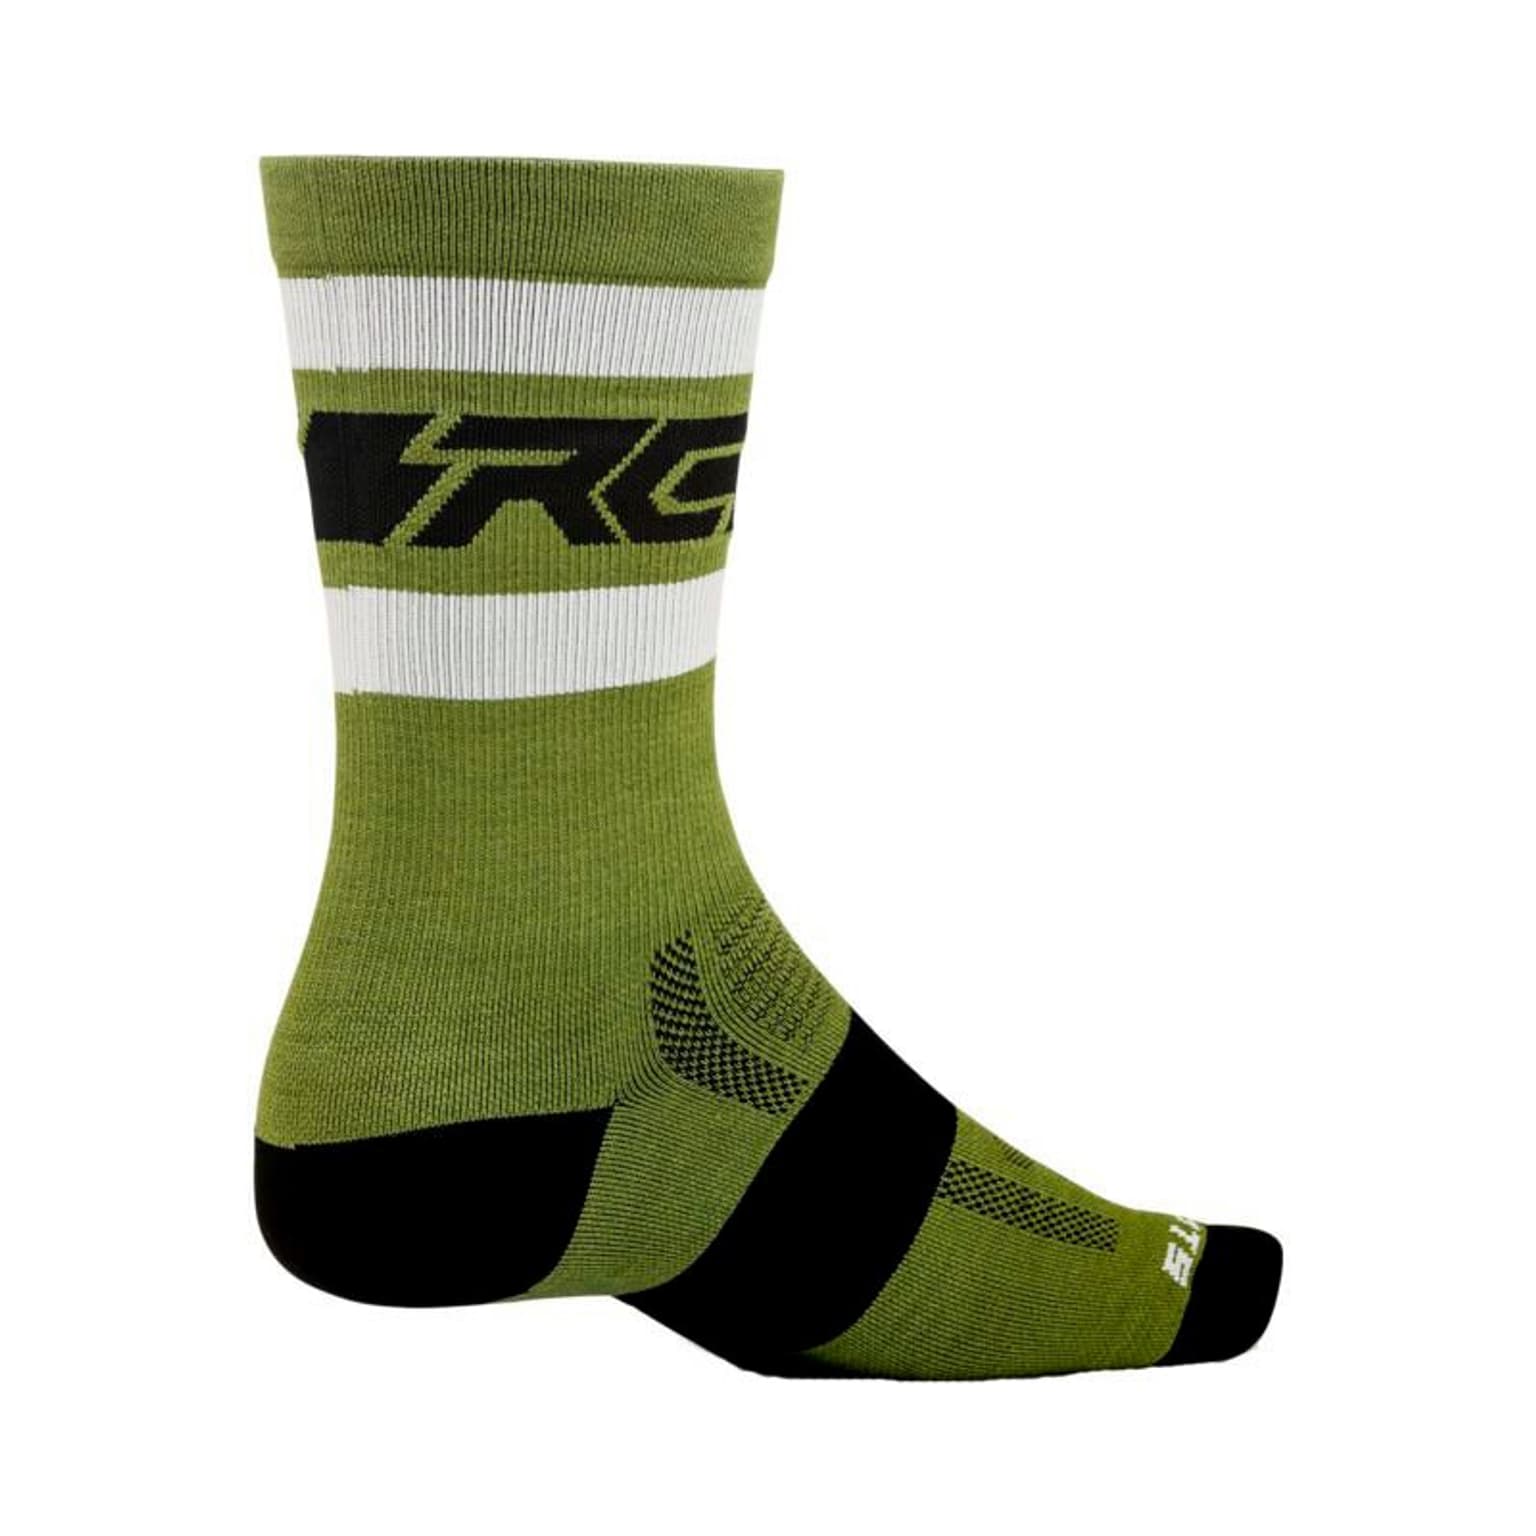 Ride Concepts Ride Concepts Woll Fifty-Fifty Velosocken moos 2